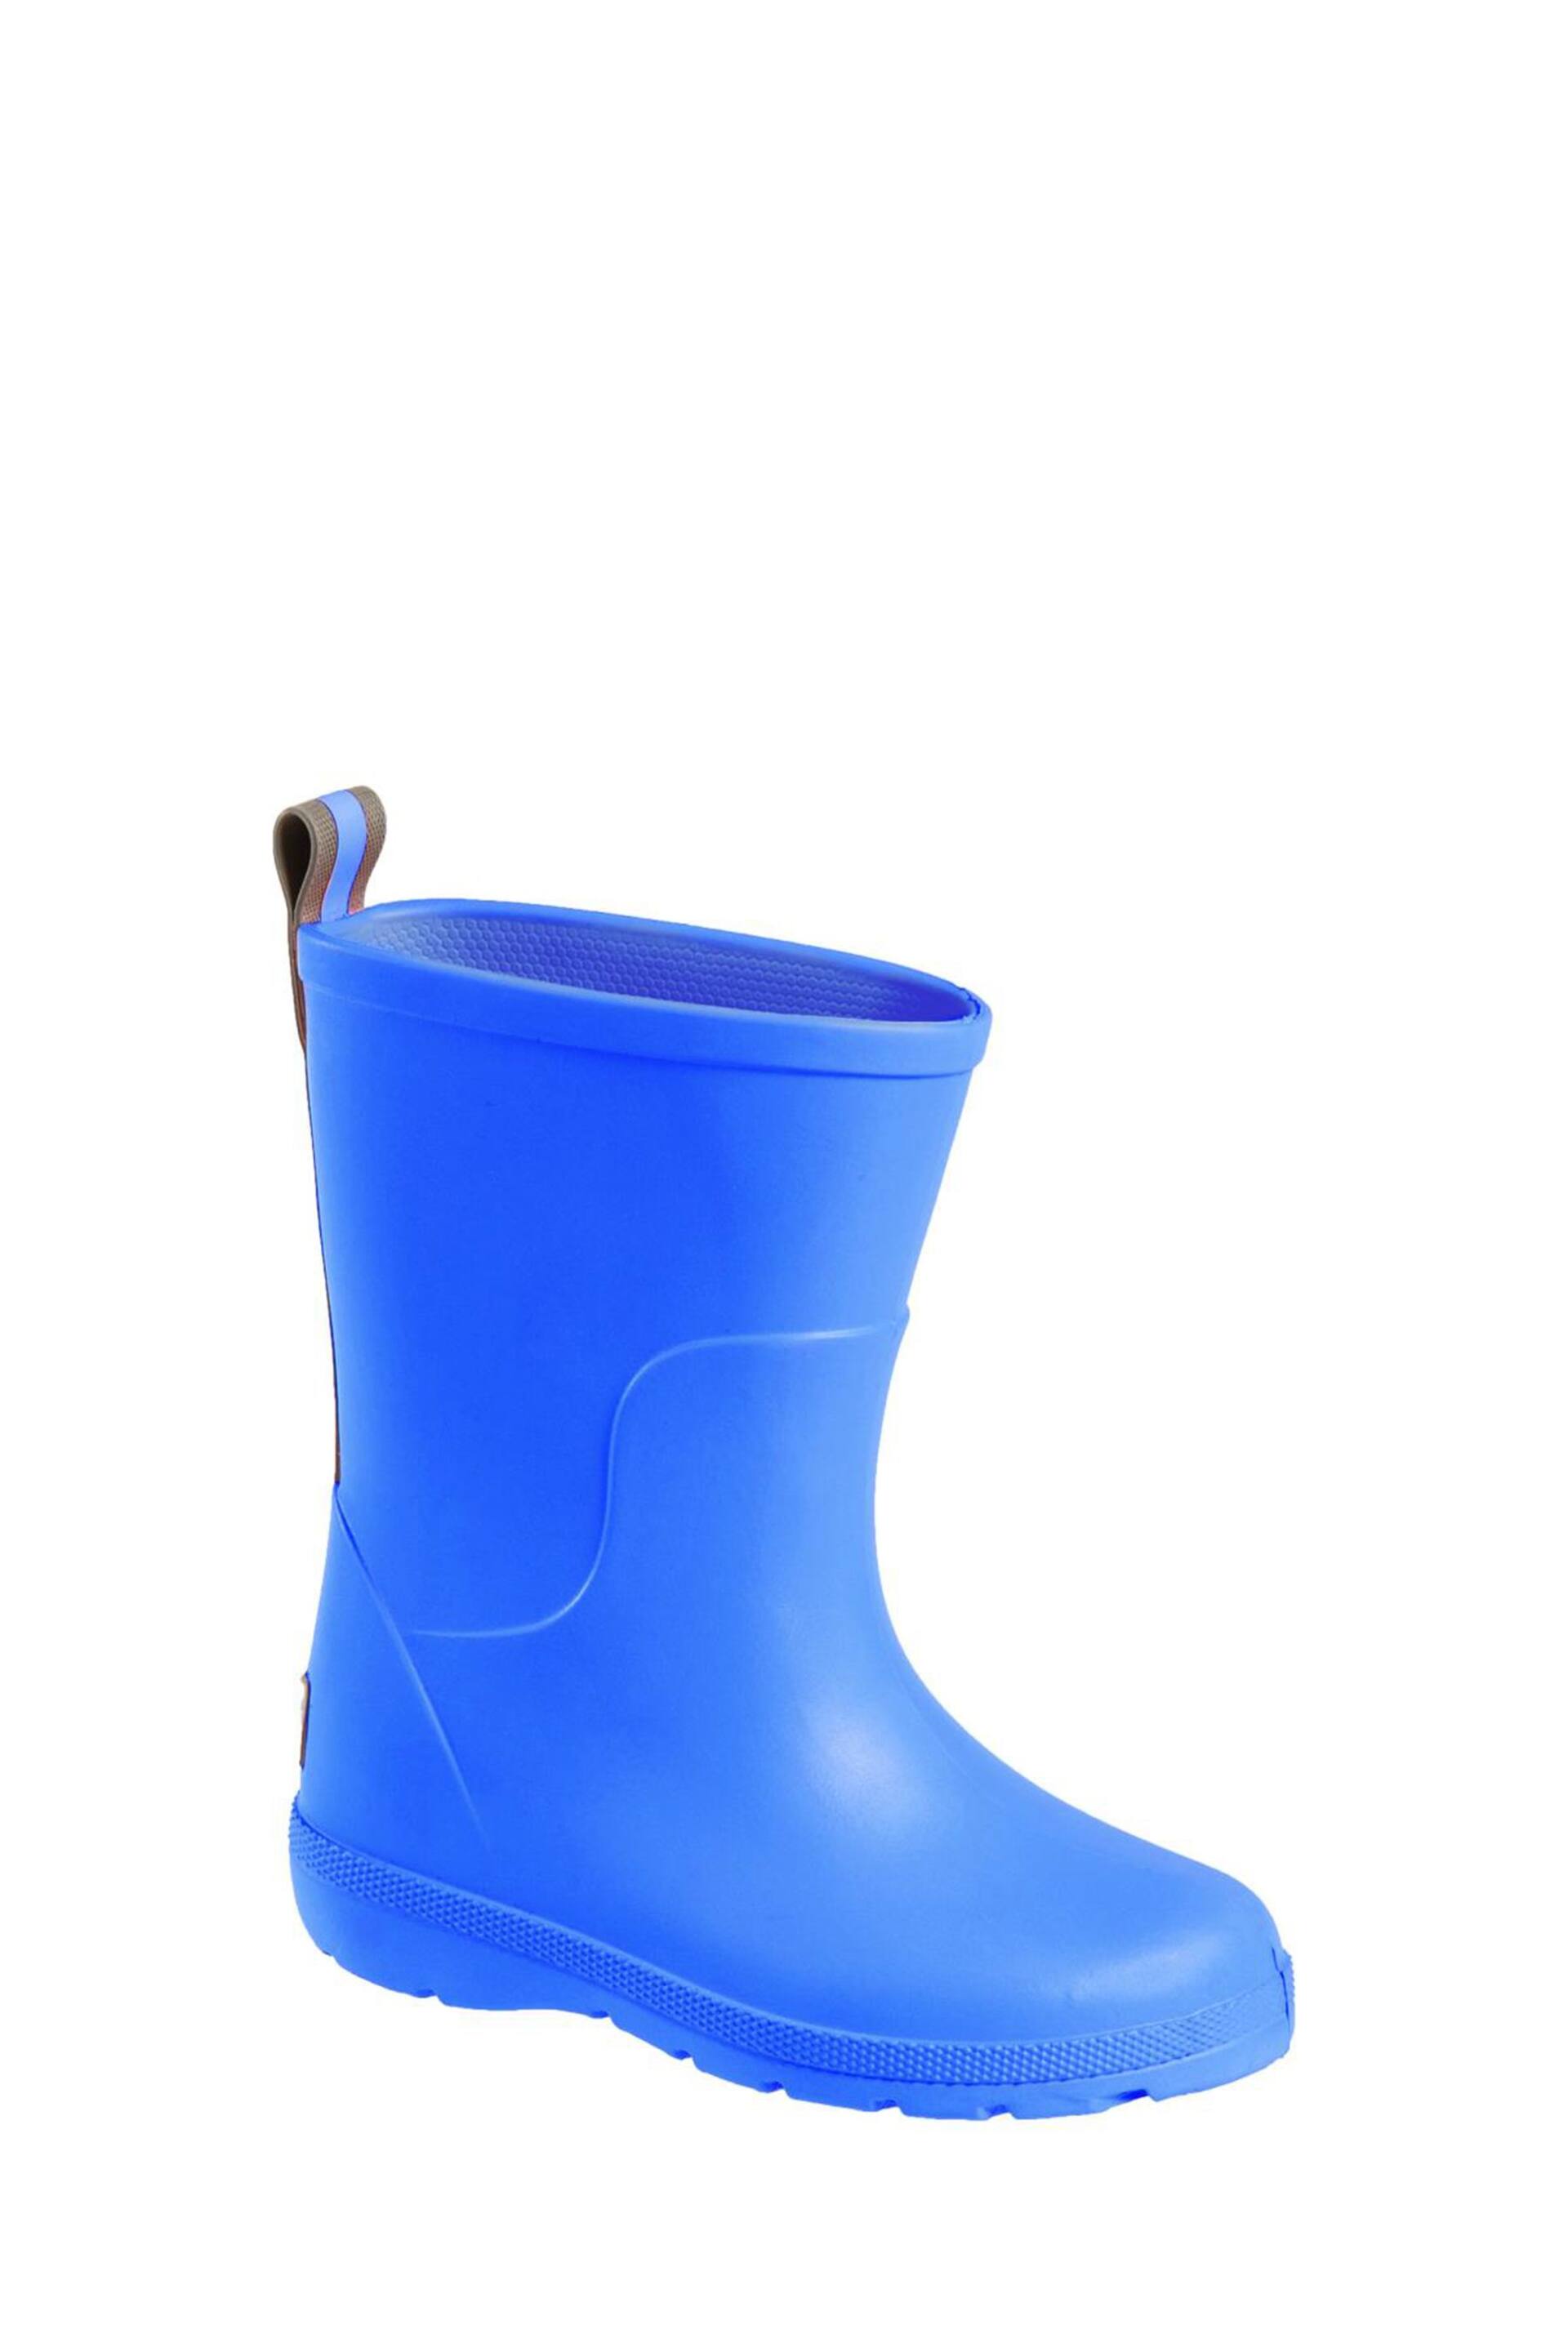 Totes Blue Childrens Charley Welly Boots - Image 4 of 7